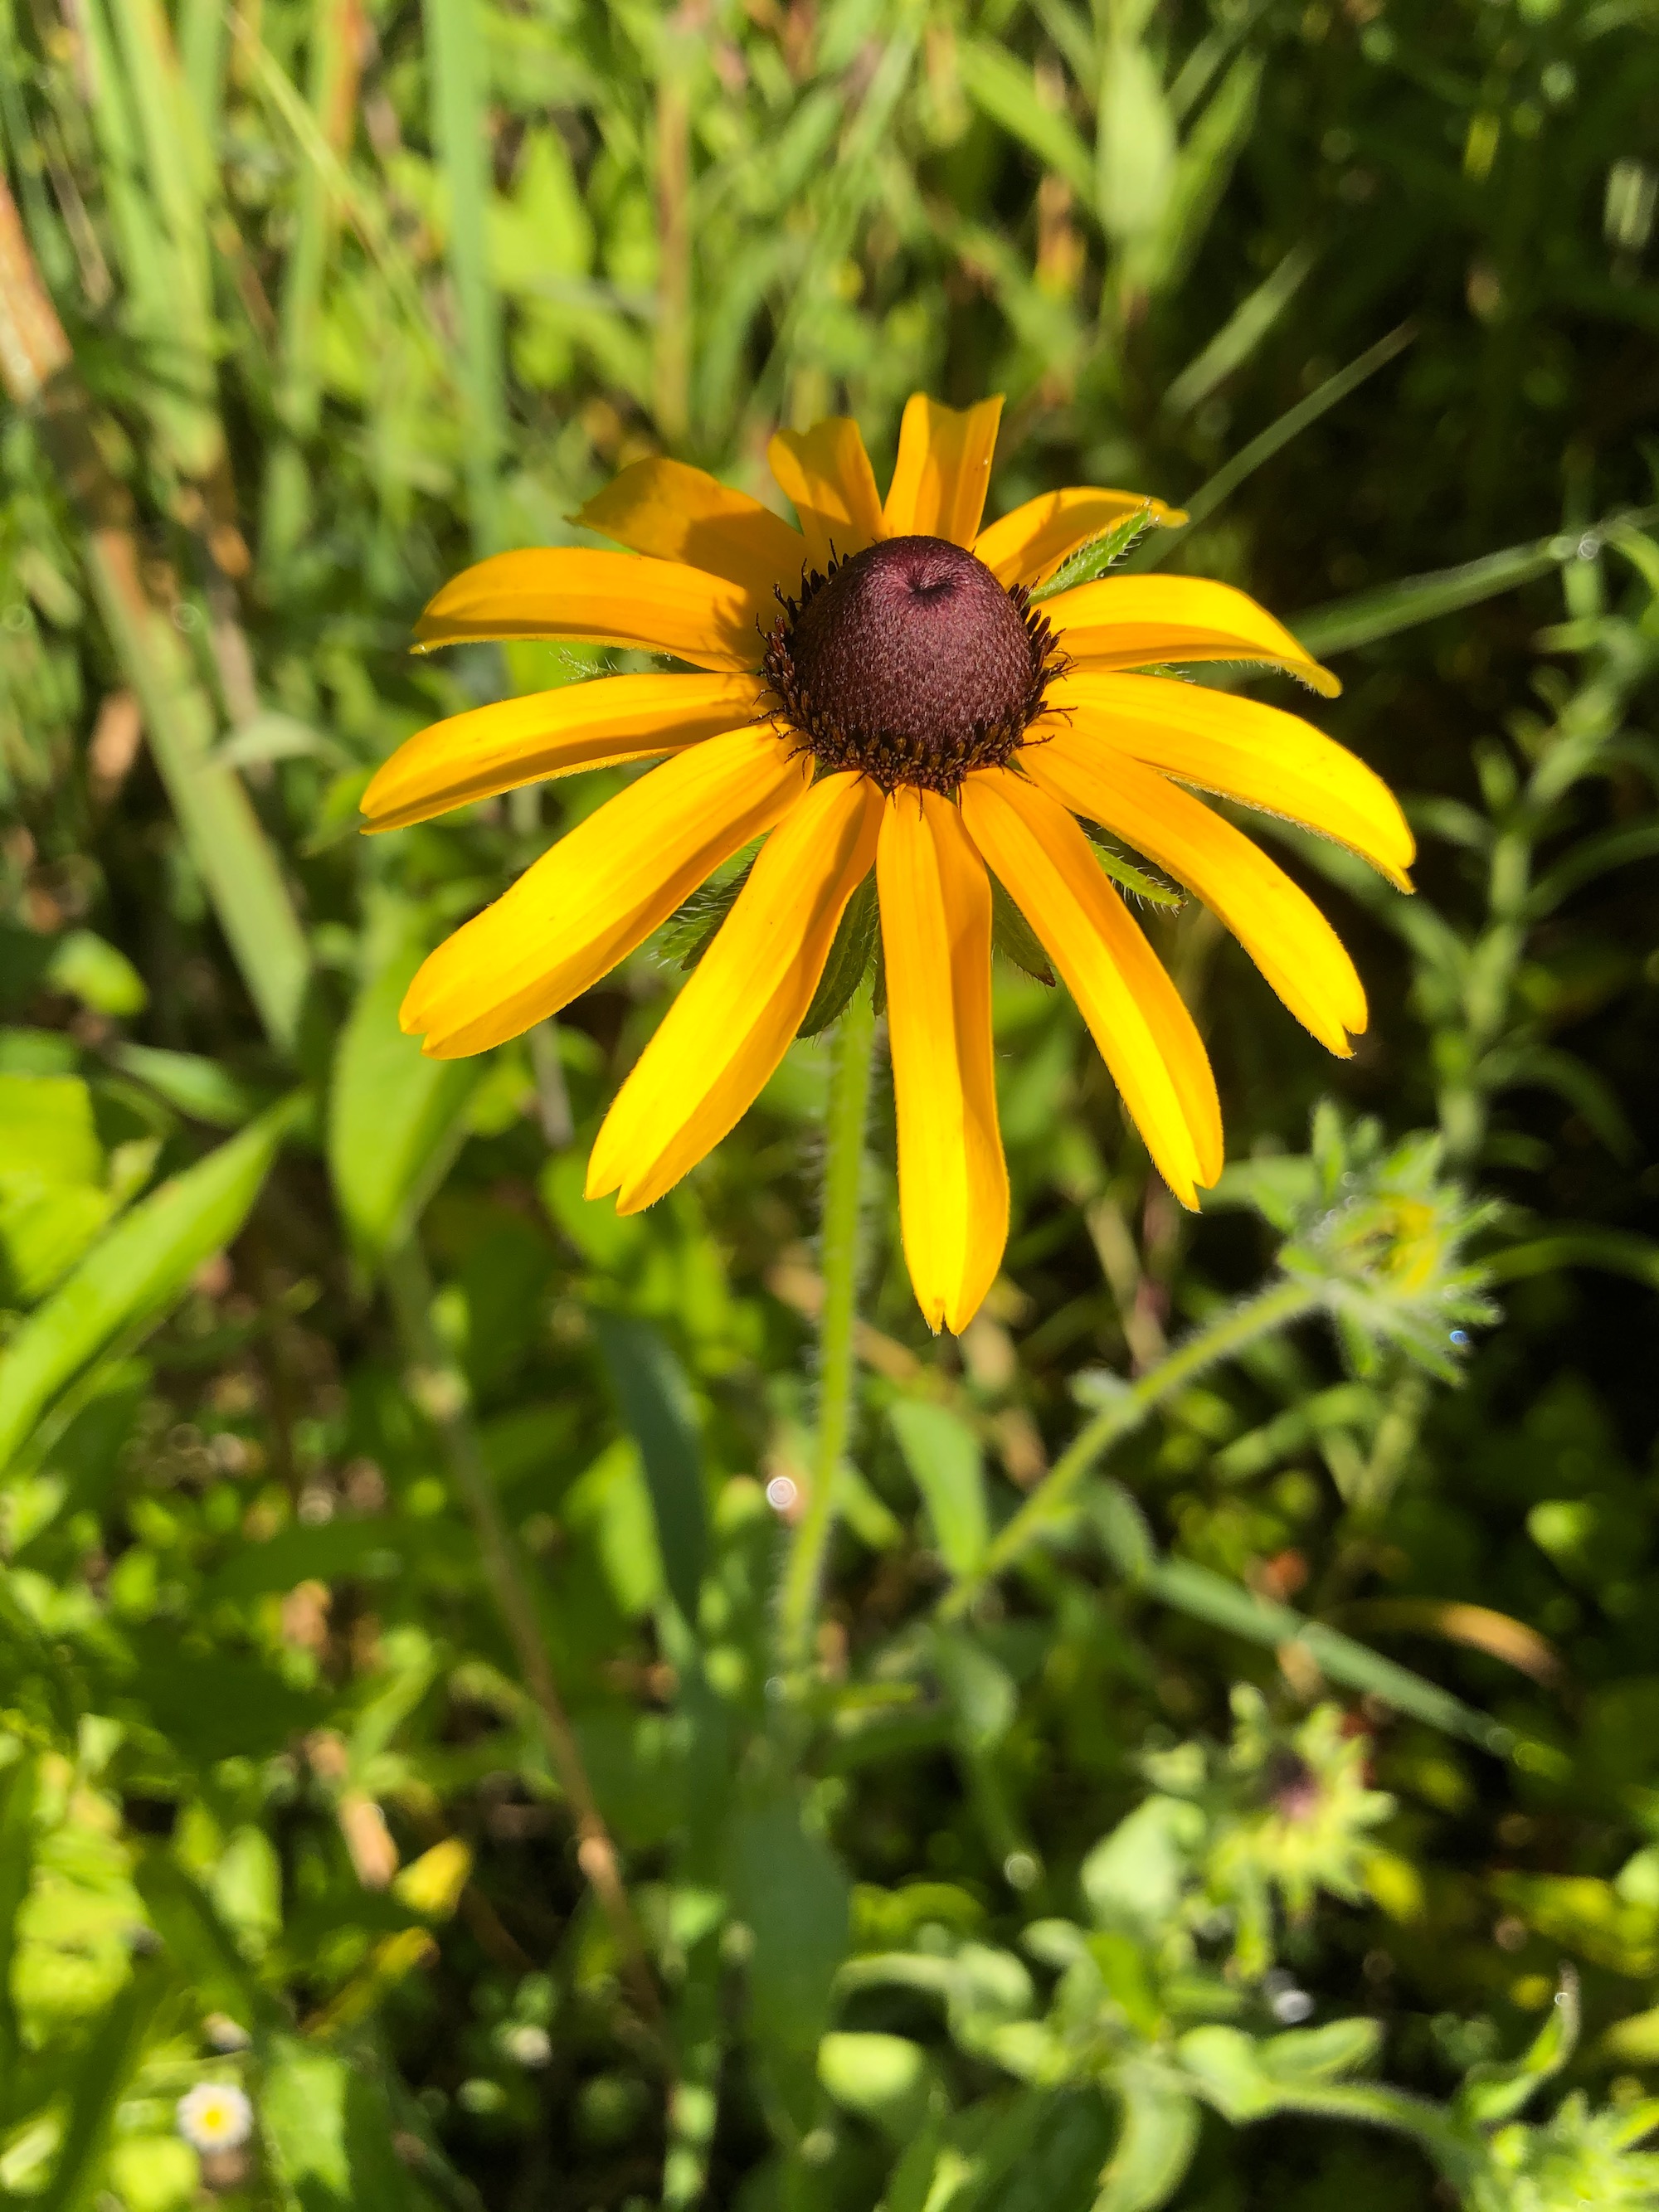 Black-eyed Susan on banks of Marion Dunn Pond in Madison, Wisconsin on June 30, 2020.